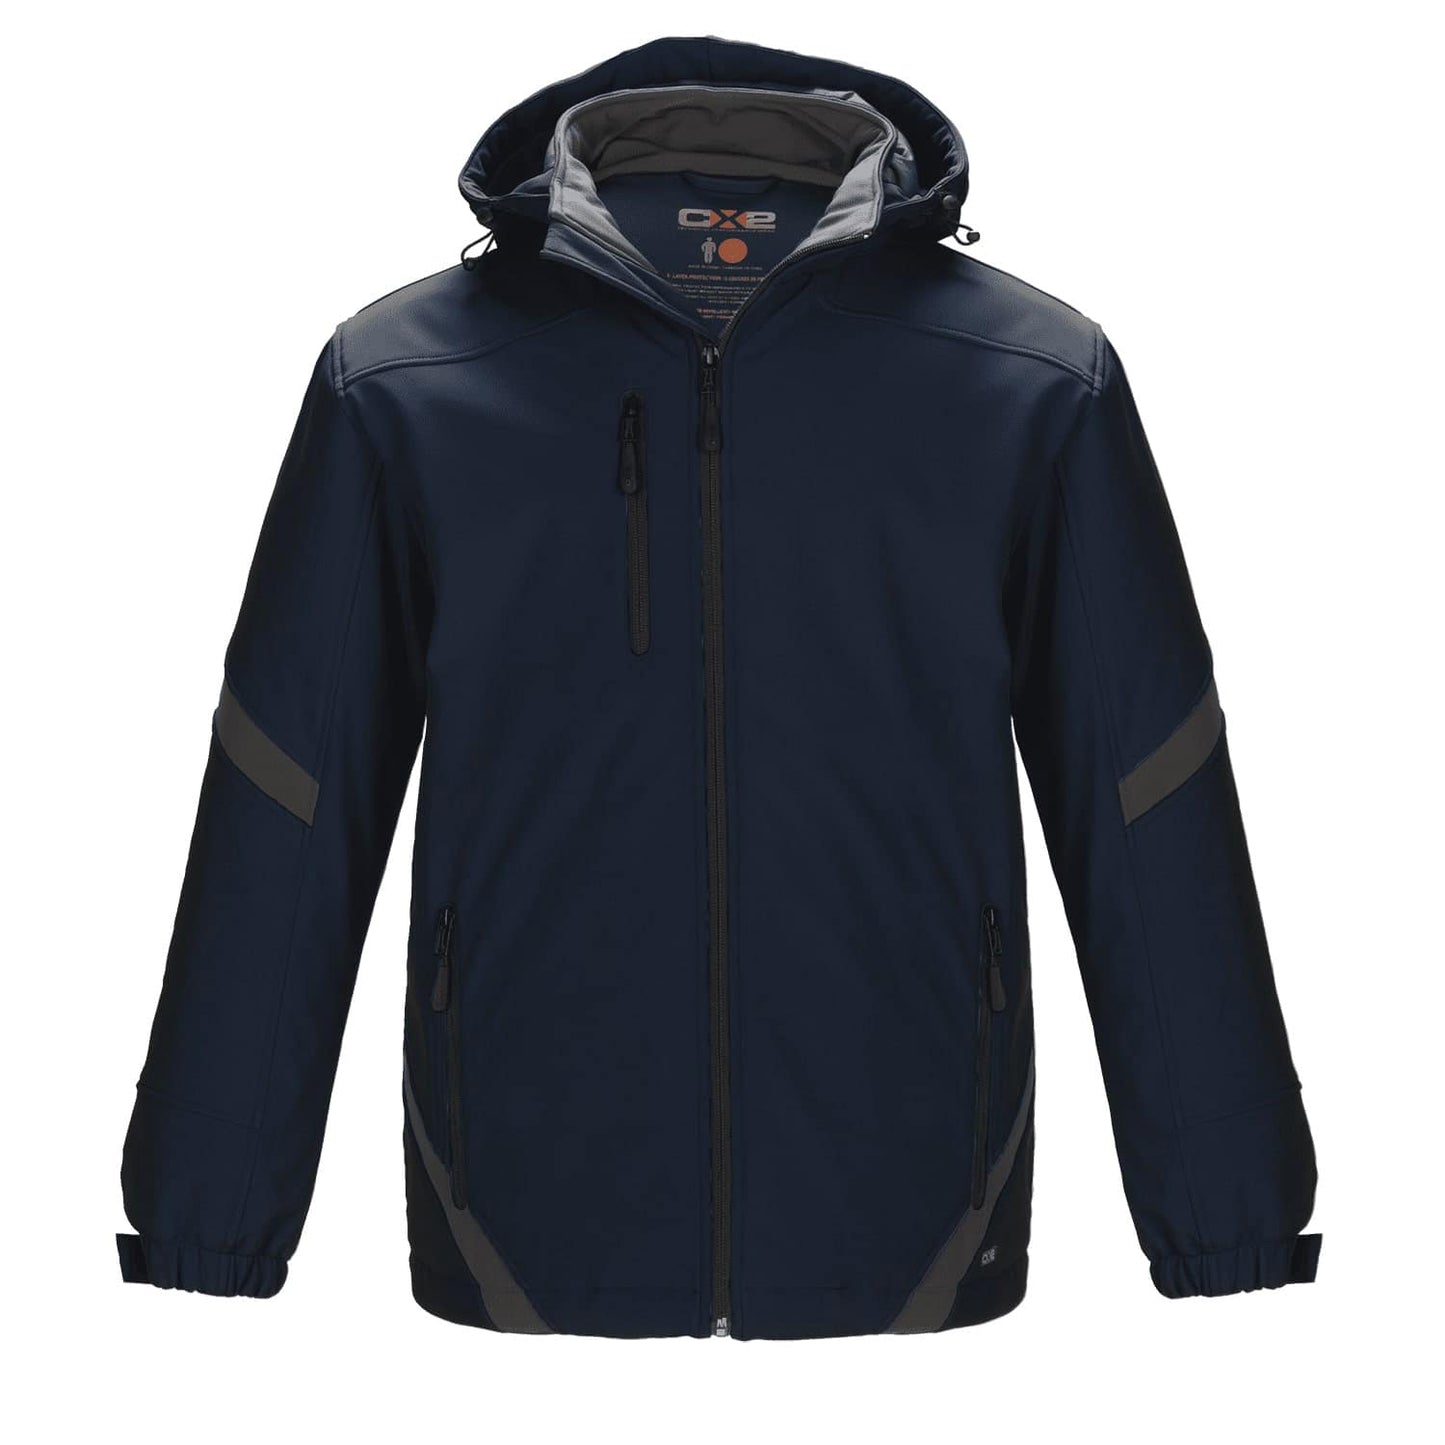 Typhoon – Insulated Softshell with Detachable hood - L03200